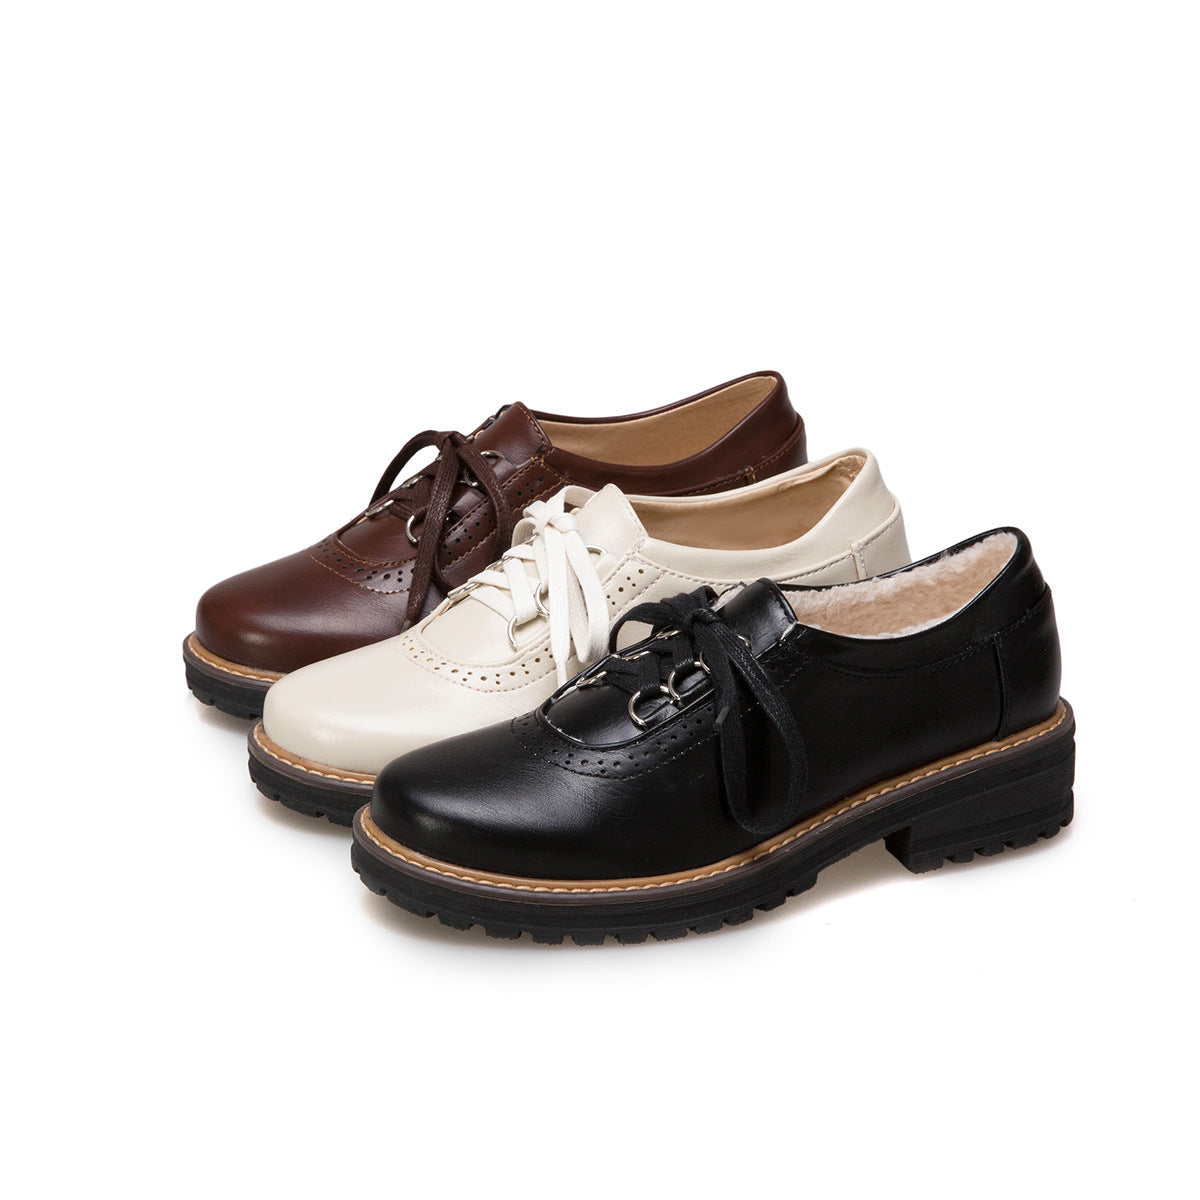 Women's Low Heeled Oxford Shoes